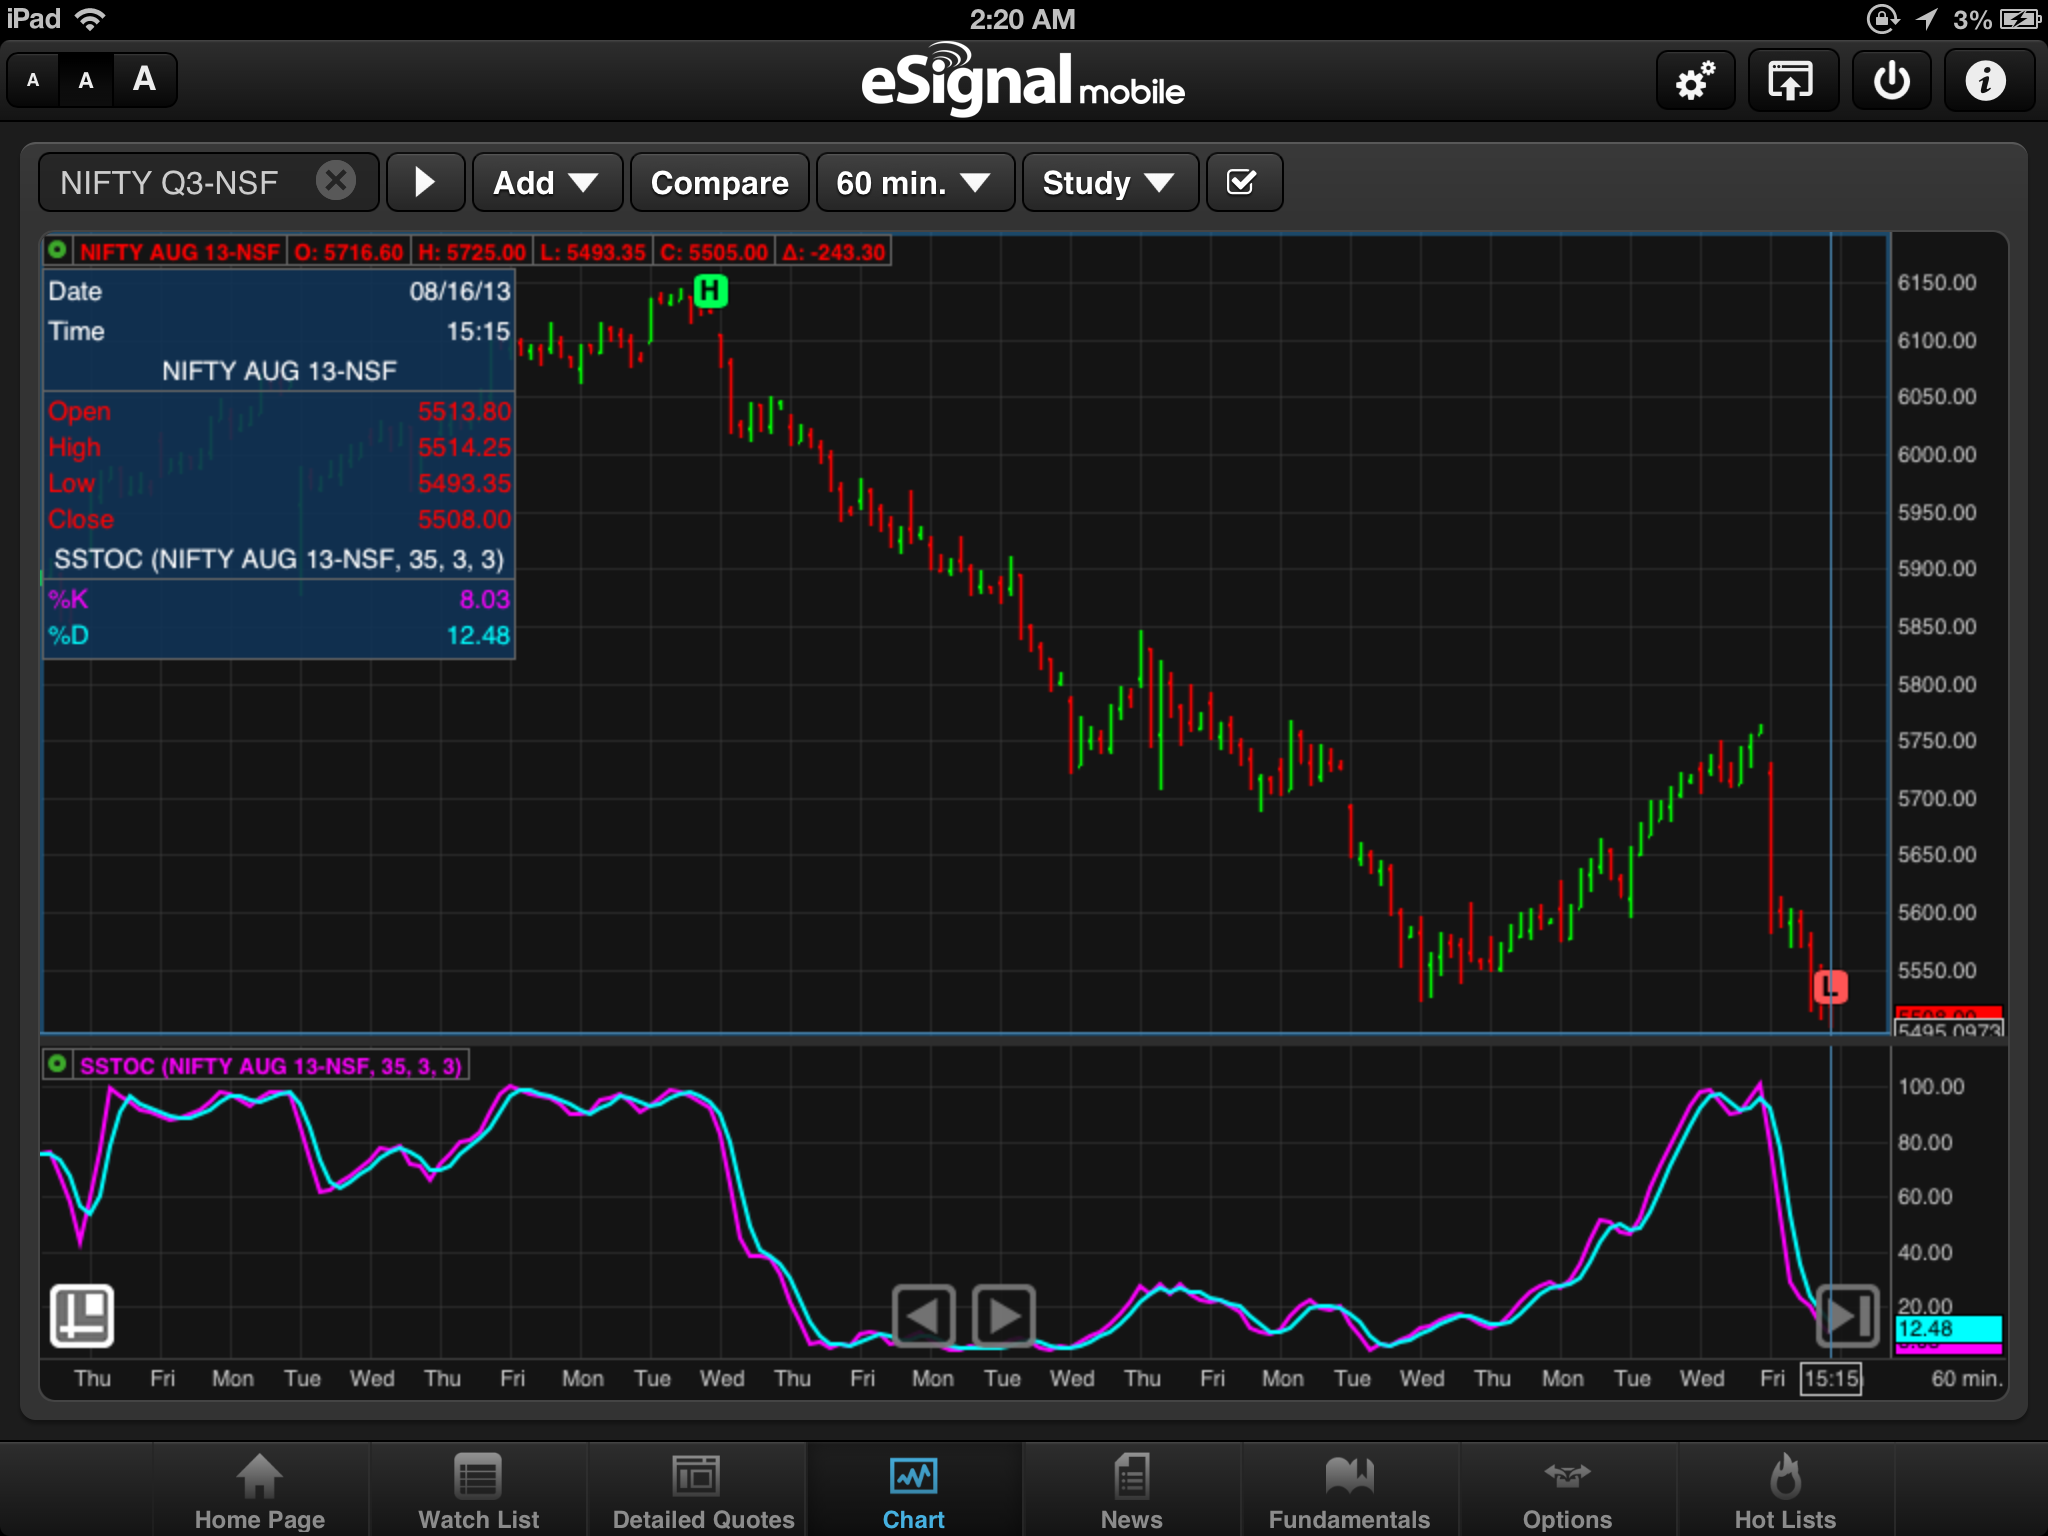 eSignal Mobile Application for iPad – Review